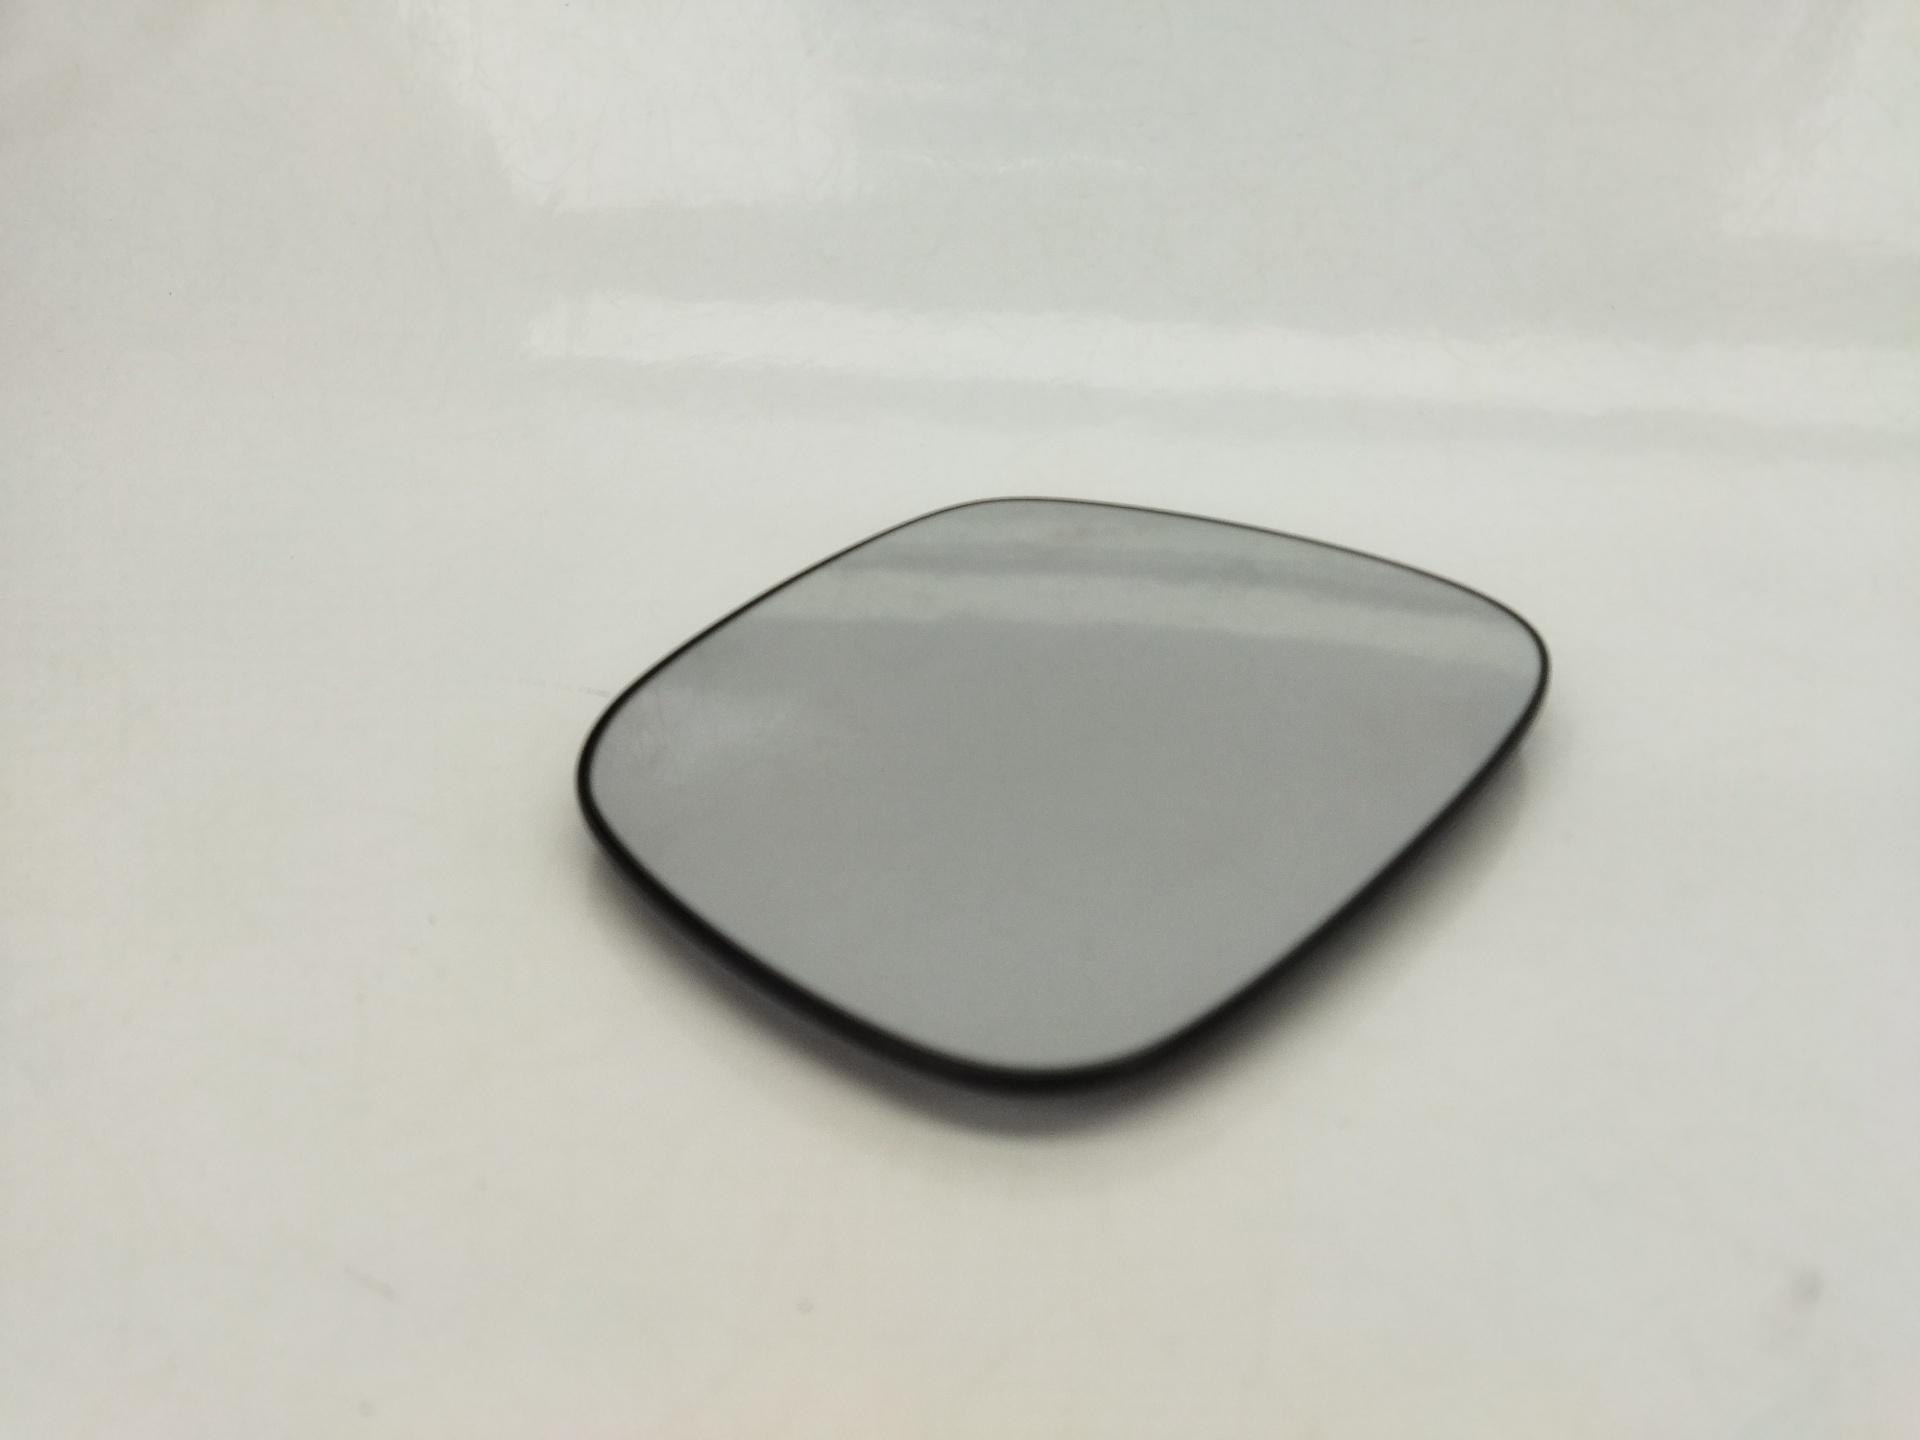 BMW X1 E84 (2009-2015) Front Right Door Mirror Glass 14501210 25200234